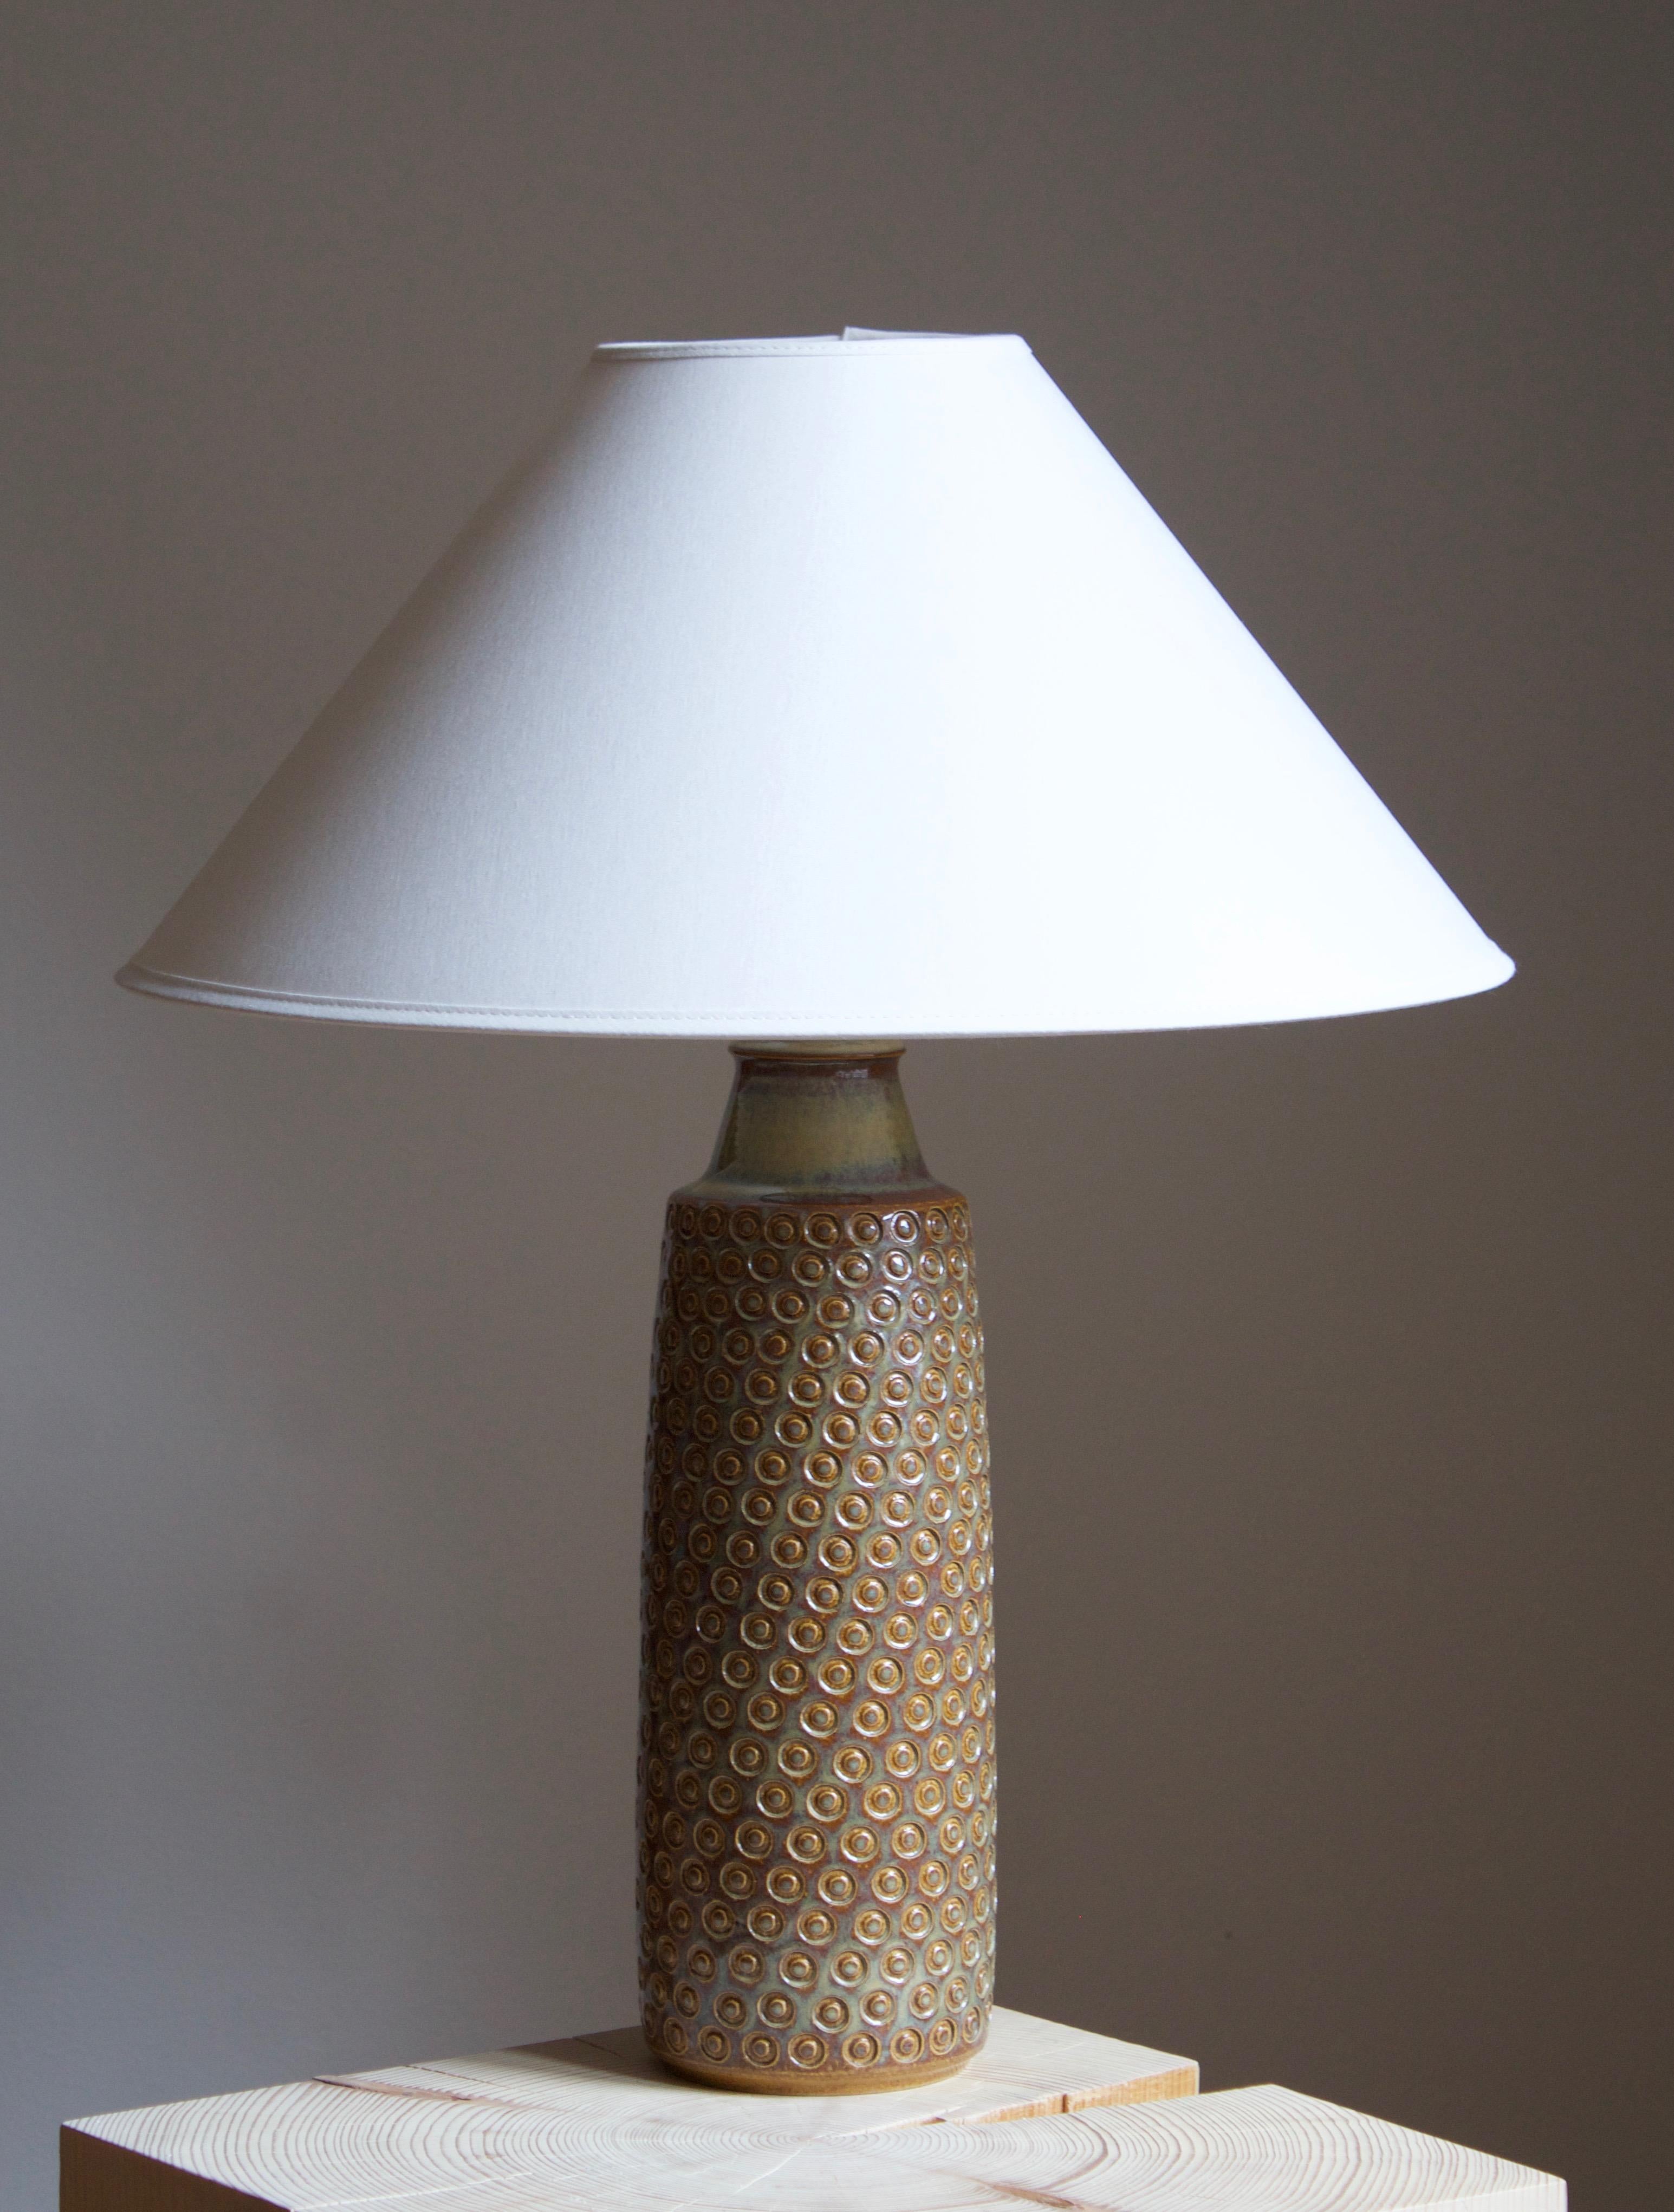 A large table lamp produced by Søholm Keramik, located on the island of Bornholm in Denmark. Features a highly artistic glazed and incised decor. 

Sold without lampshade. Stated dimensions exclude the lampshade.

Glaze features brown-green